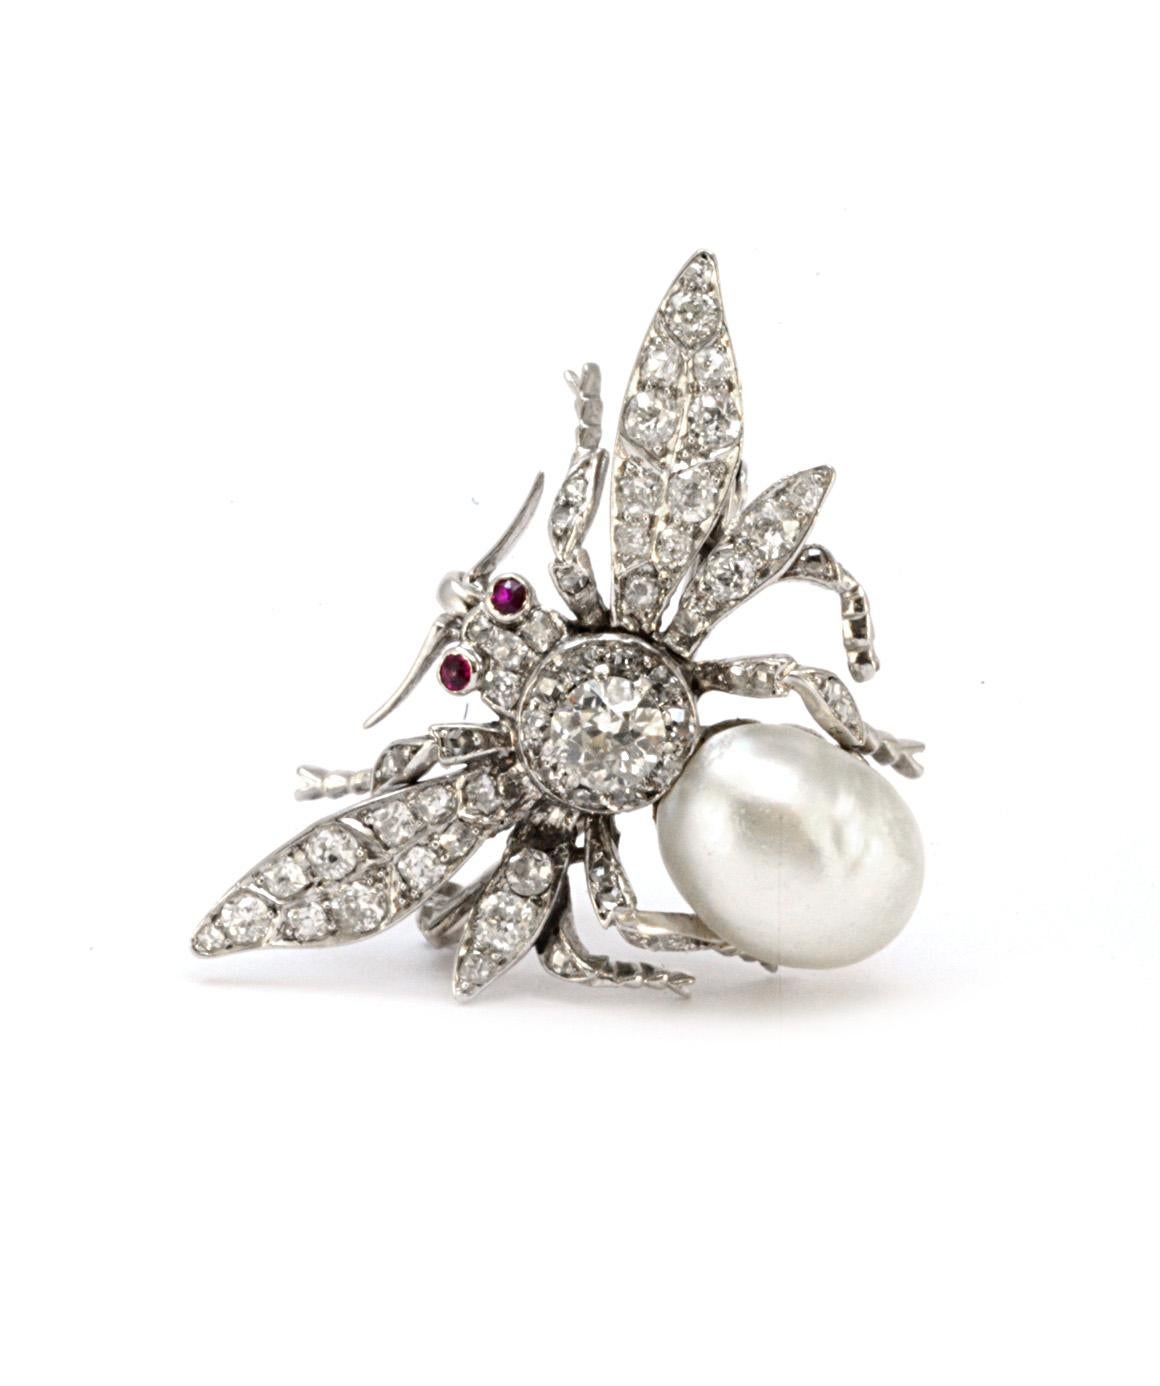 Pure Platinum Bug Brooch with Genuine Ruby and Pearl in Excellent Condition! This bee brooch is pure platinum, and the pin fastener is 14K White Gold. The bee has rubies for eyes, approximately .028CTTW, and a pearl abdomen about 13.53ct. There are